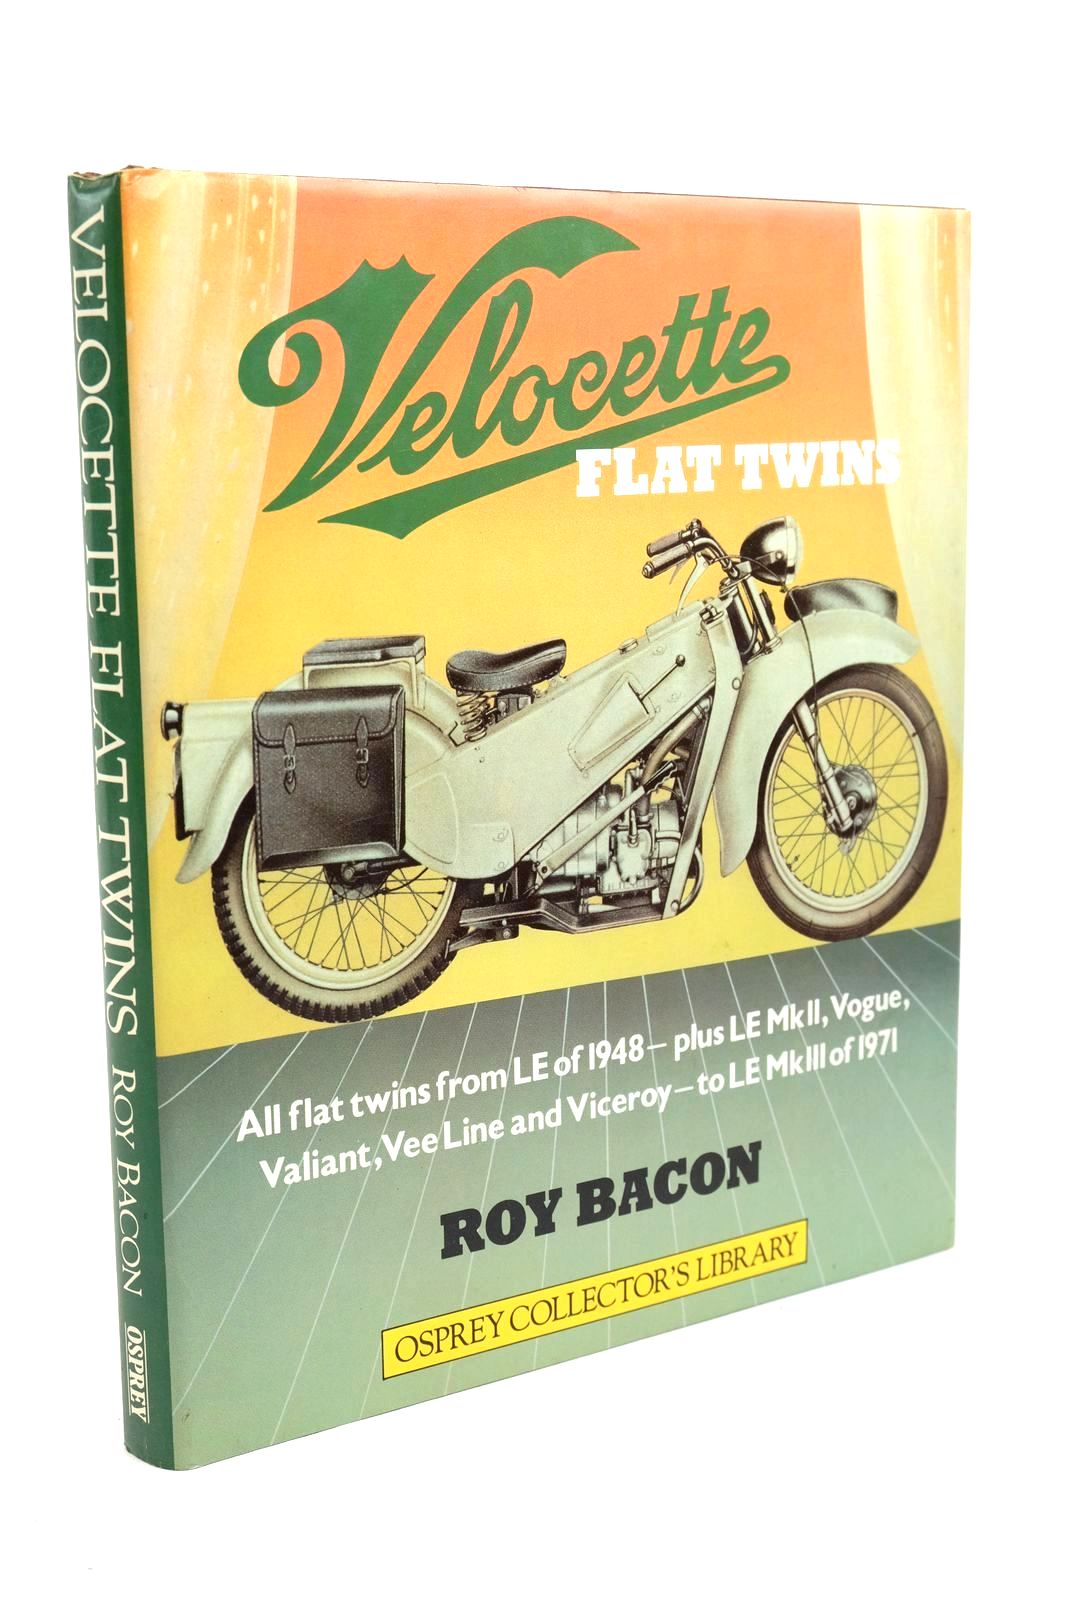 Photo of VELOCETTE FLAT-TWINS written by Bacon, Roy published by Osprey Publishing (STOCK CODE: 1321236)  for sale by Stella & Rose's Books